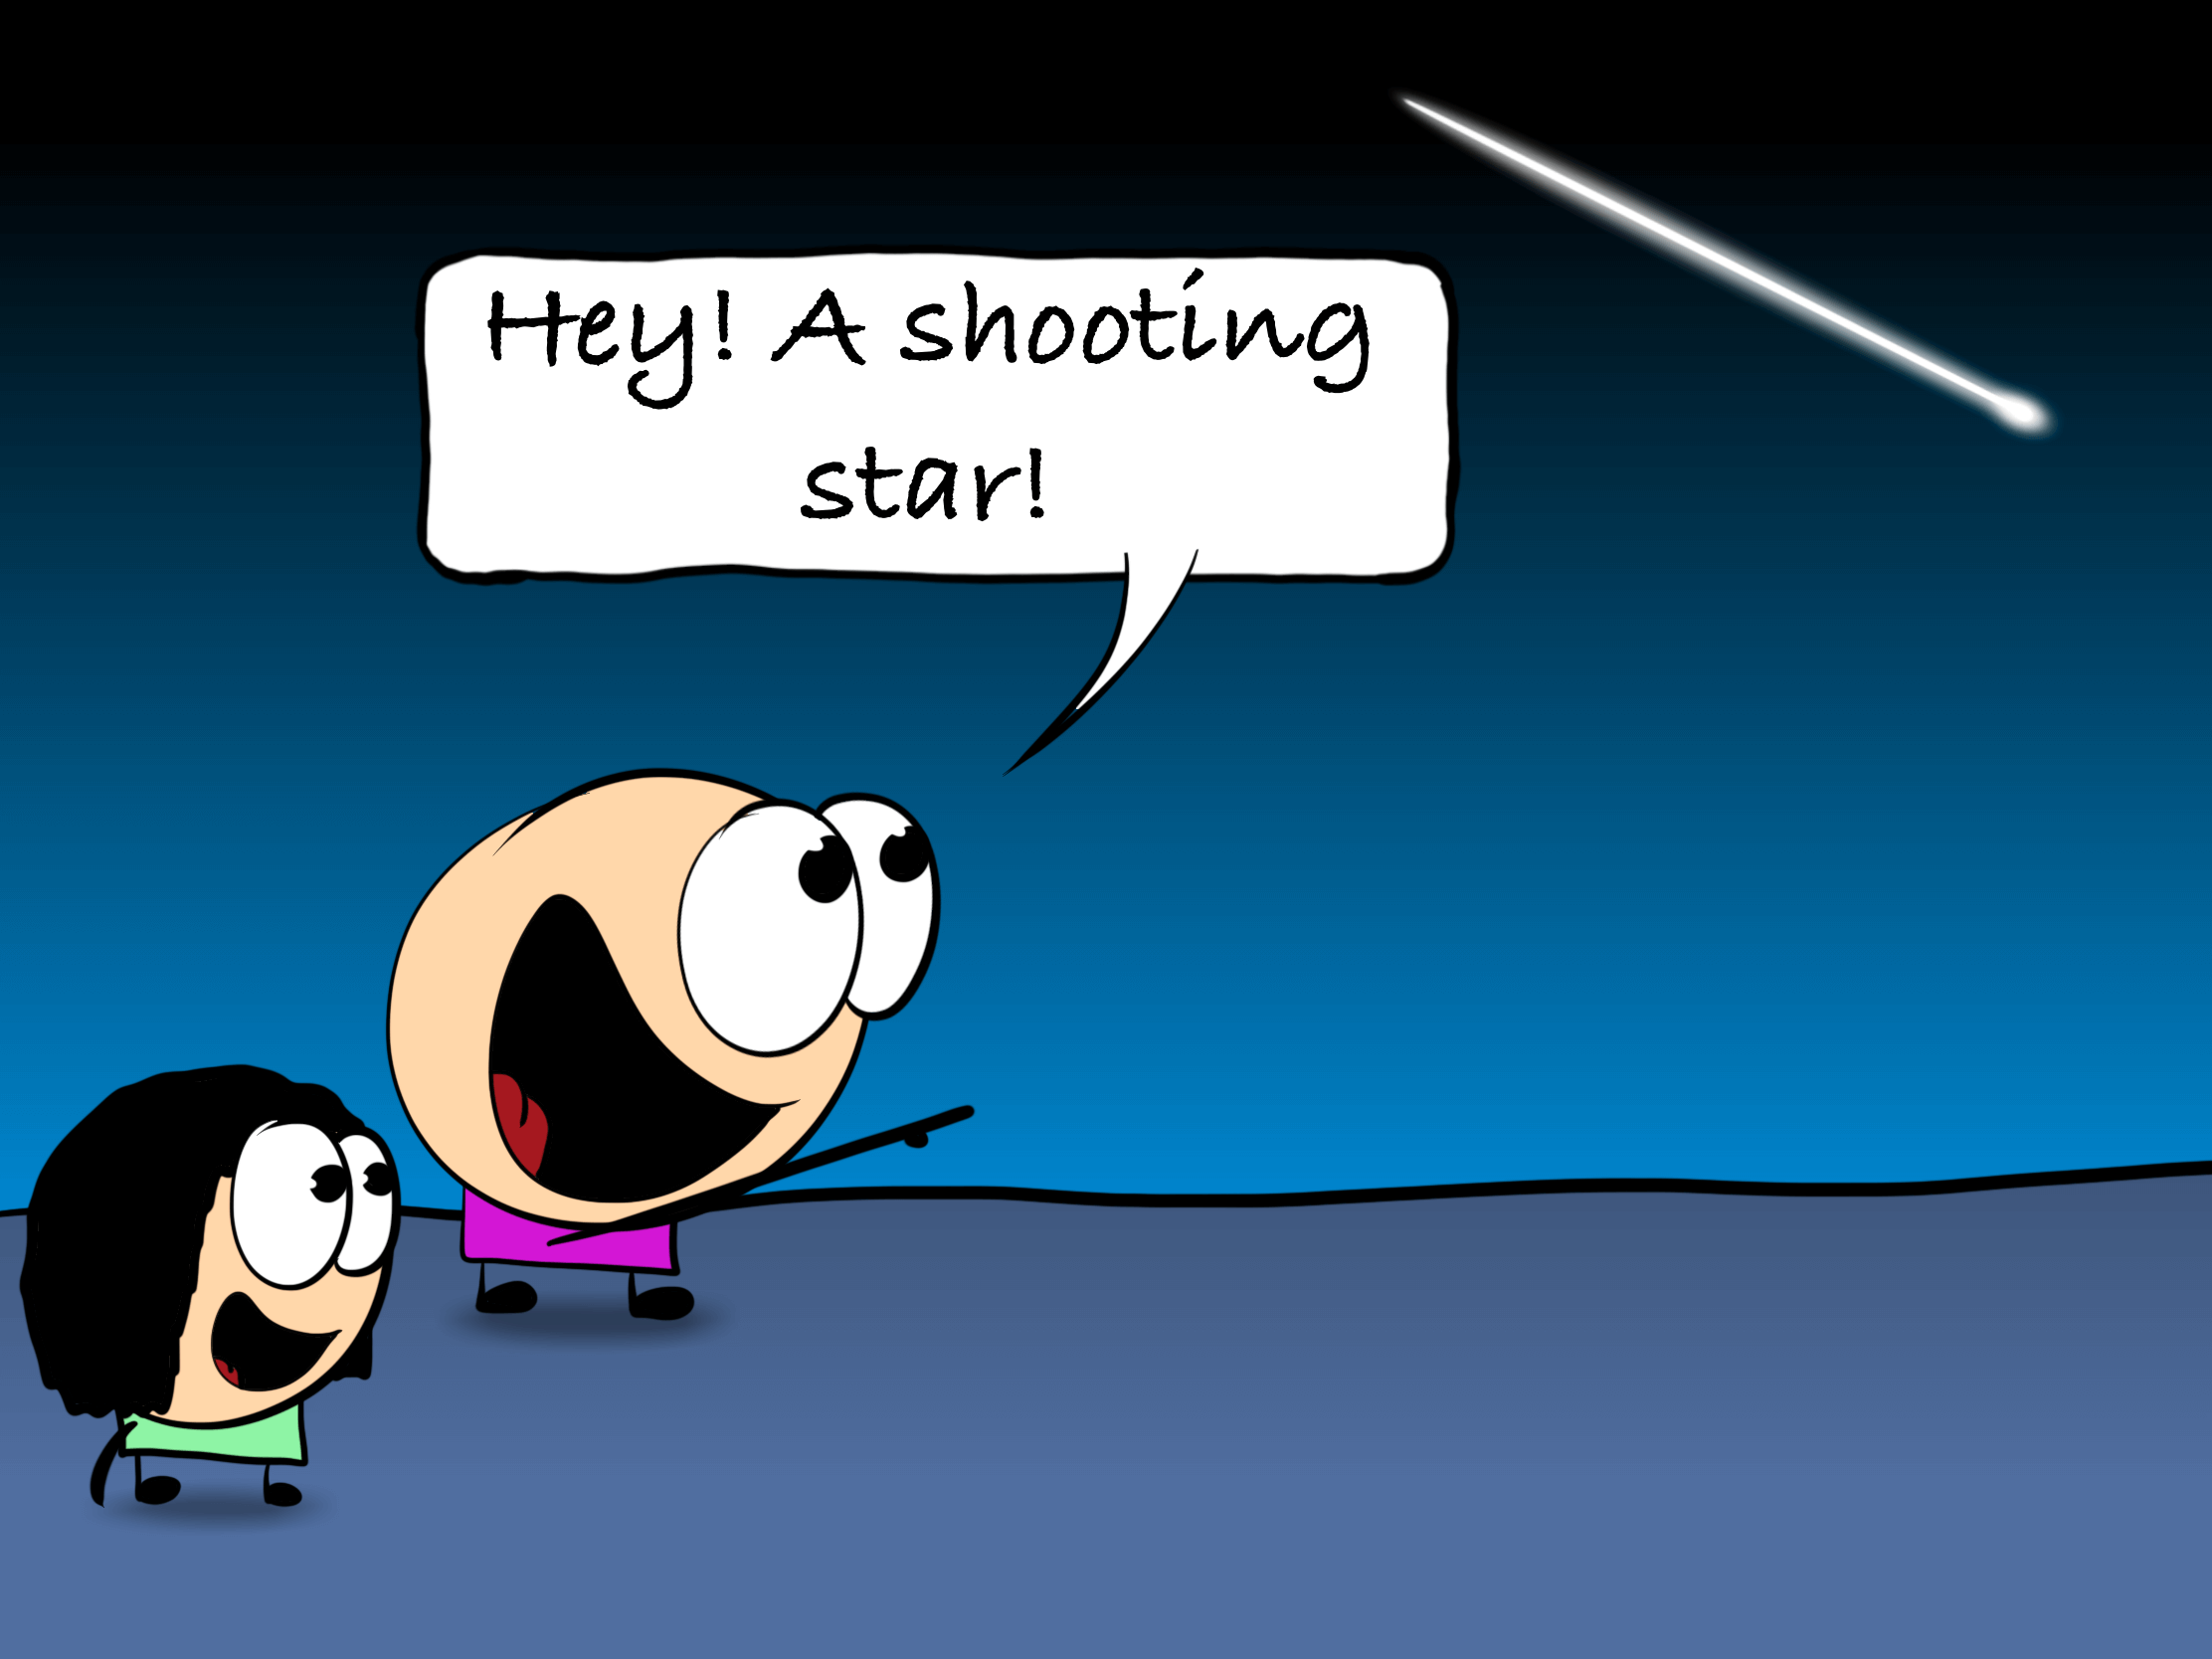 When You See a Shooting Star, Don’t Make a Wish